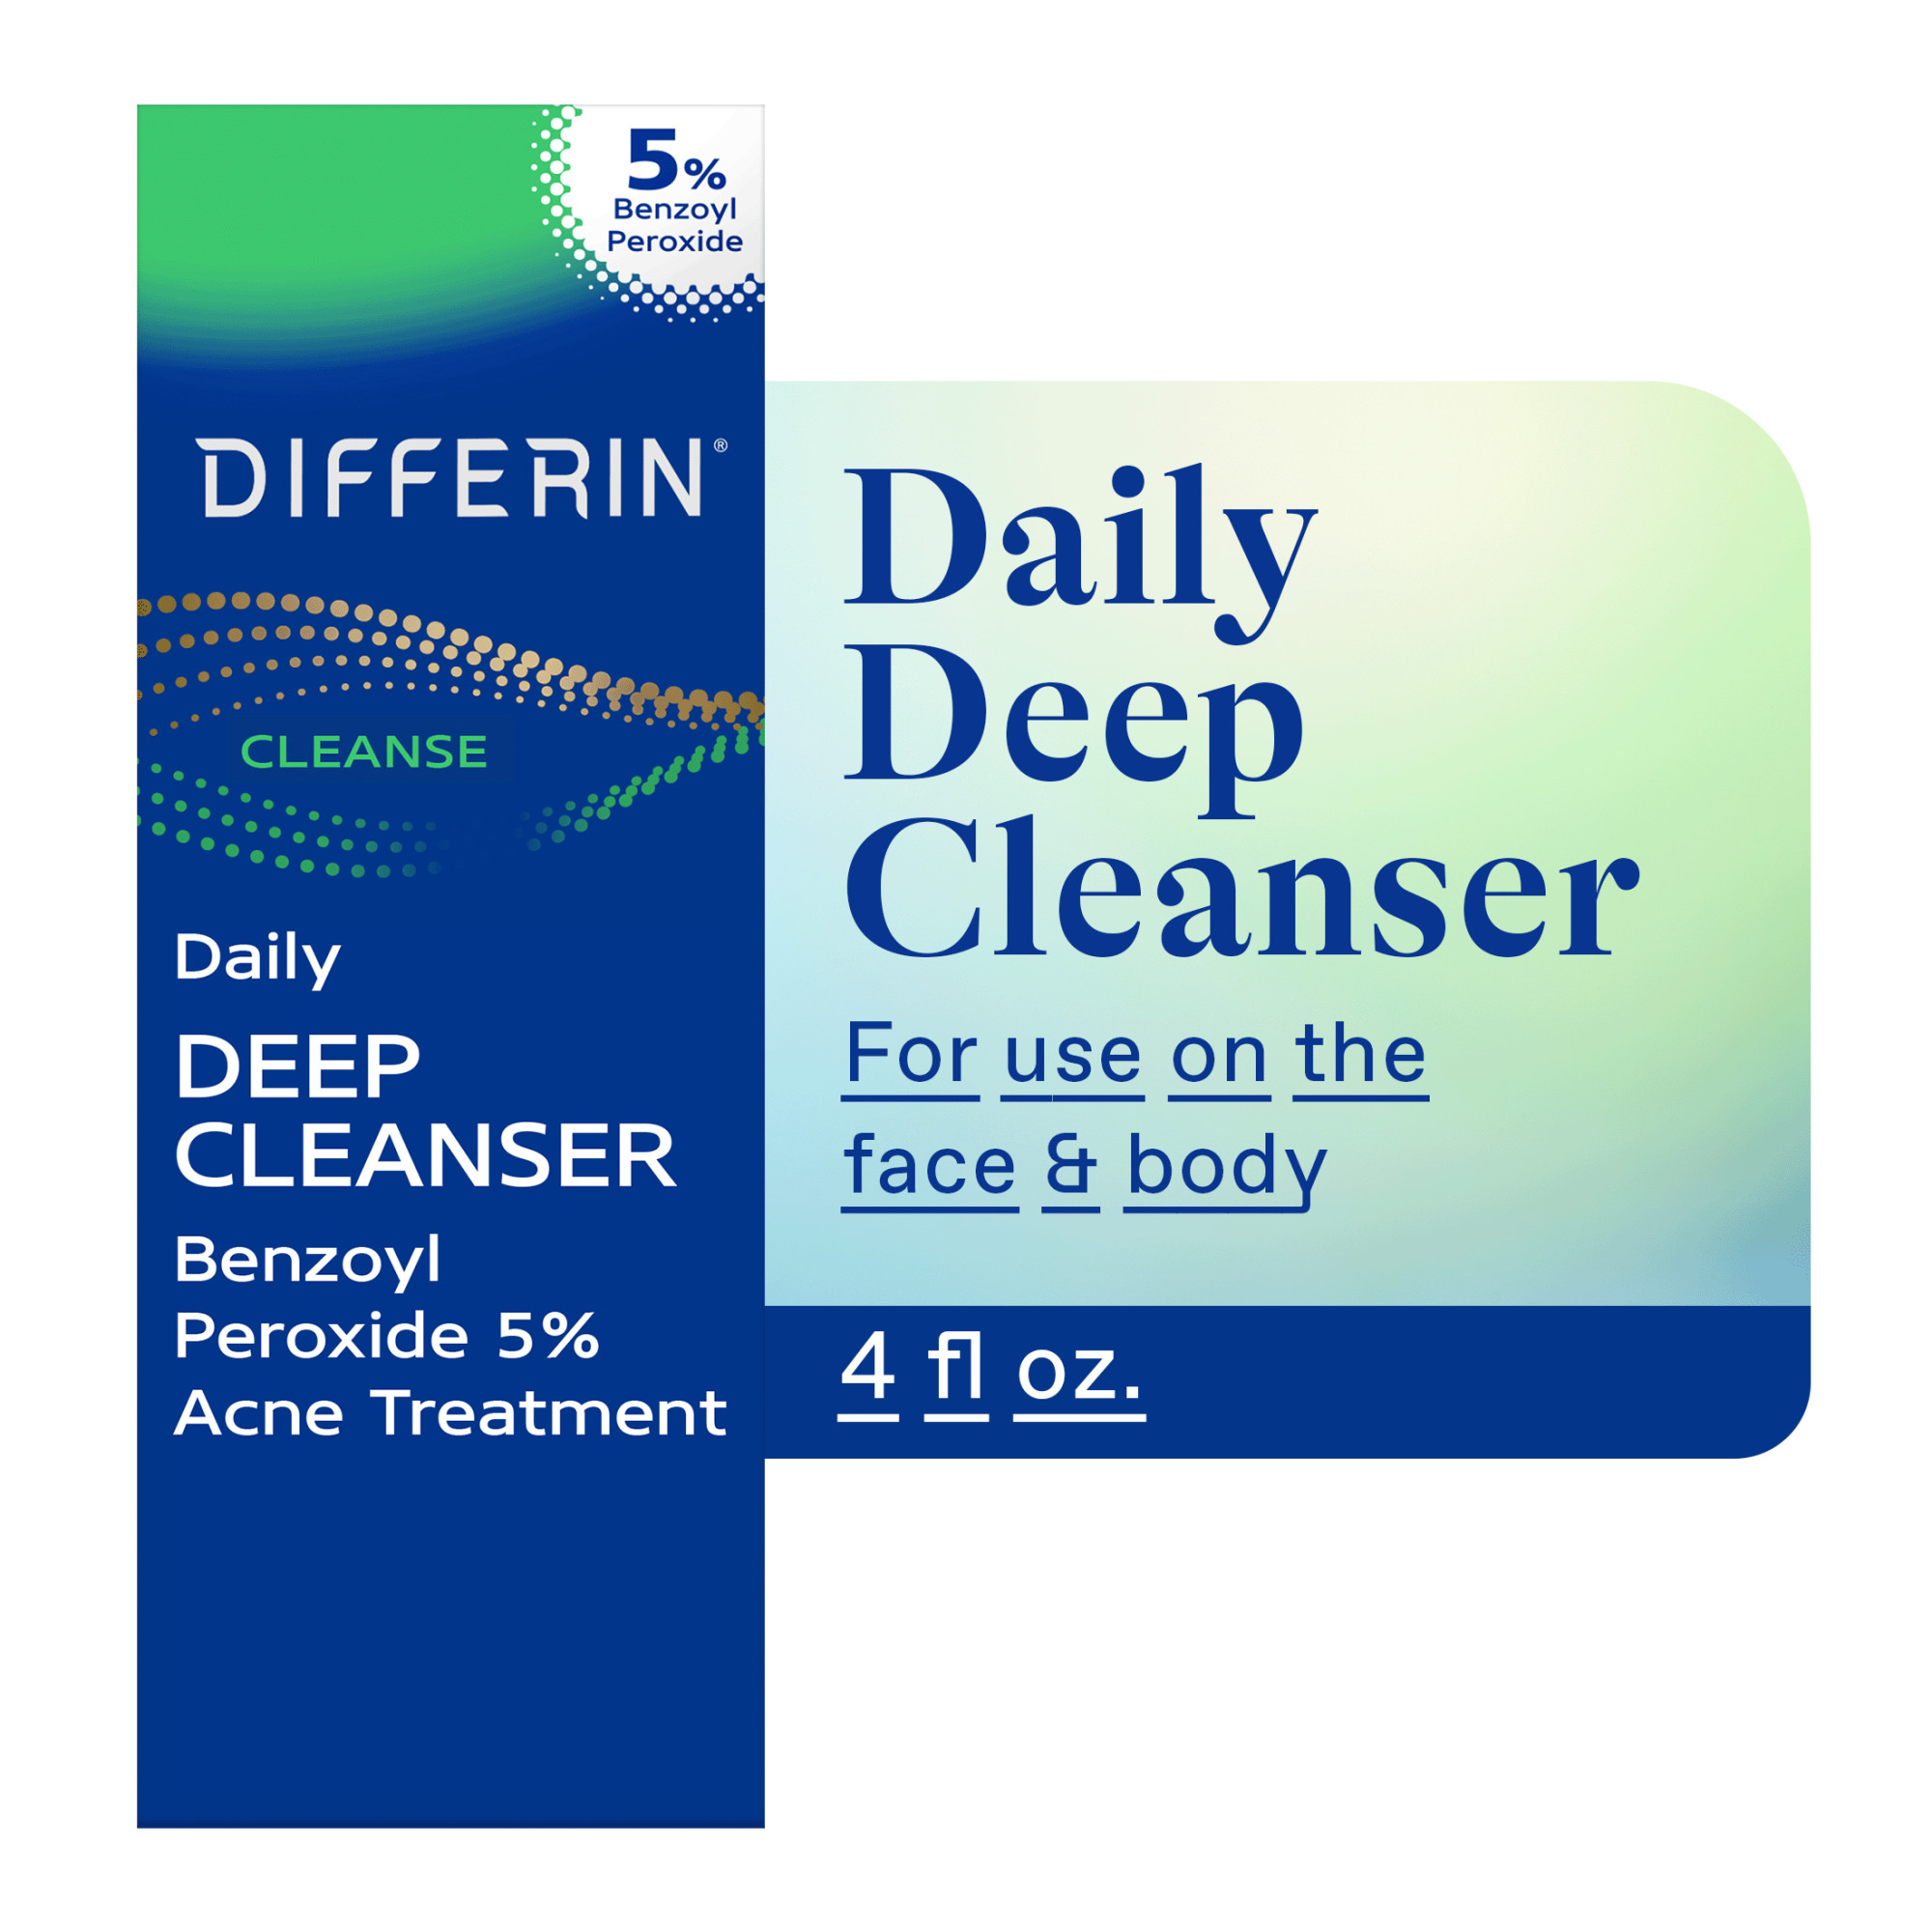 Differin Daily Deep Cleanser with 5% Benzoyl Peroxide, Face Wash for Acne Prone Skin, 4 oz - image 1 of 11